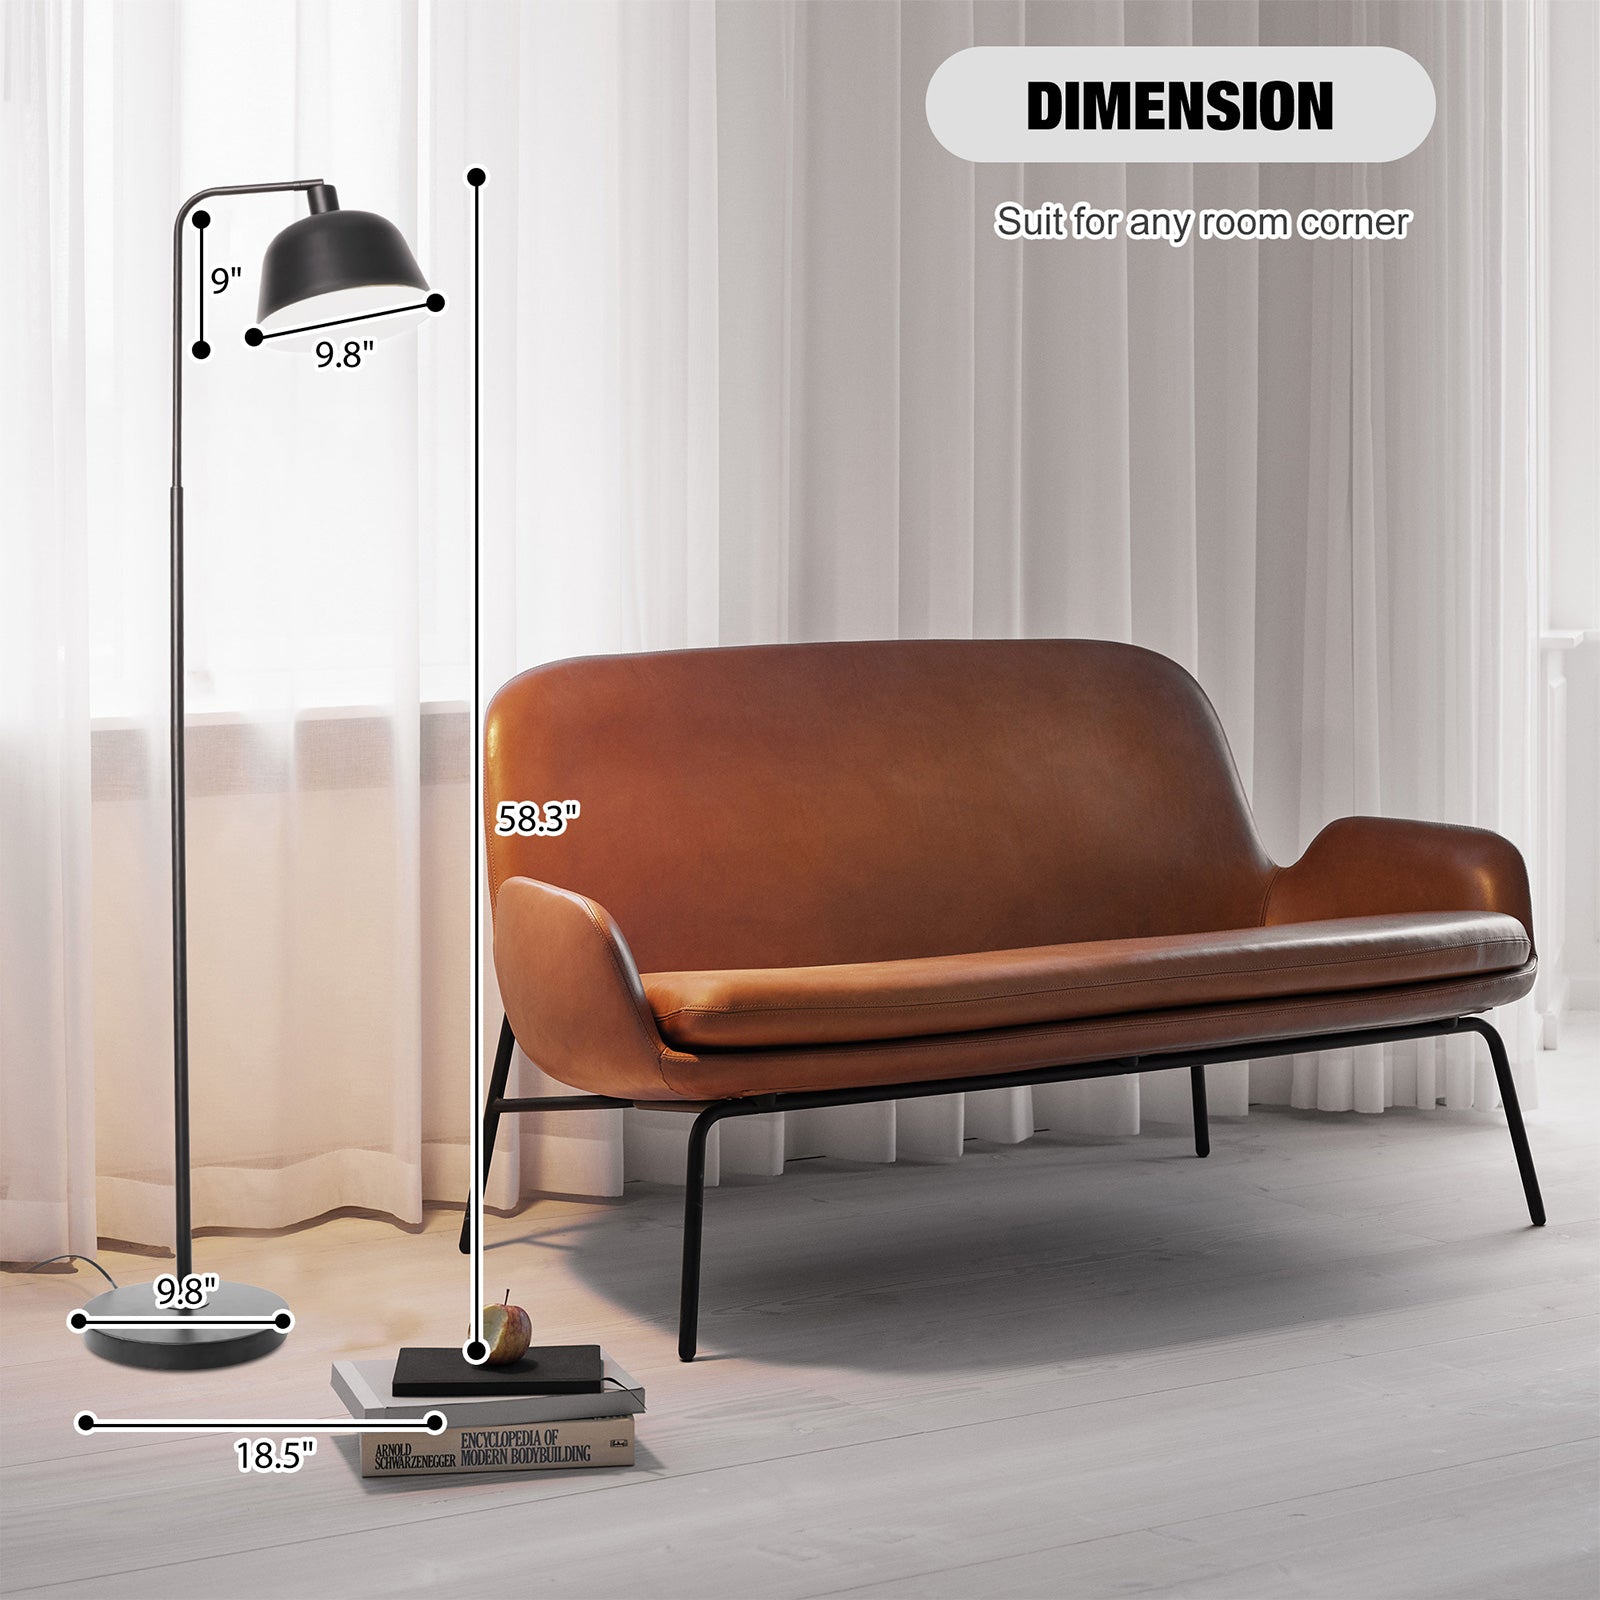 Standing Floor Lamp with Adjustable Metal Shade 8W LED Bulb Foot Switch Tall Stand Up Floor Lamp, Black